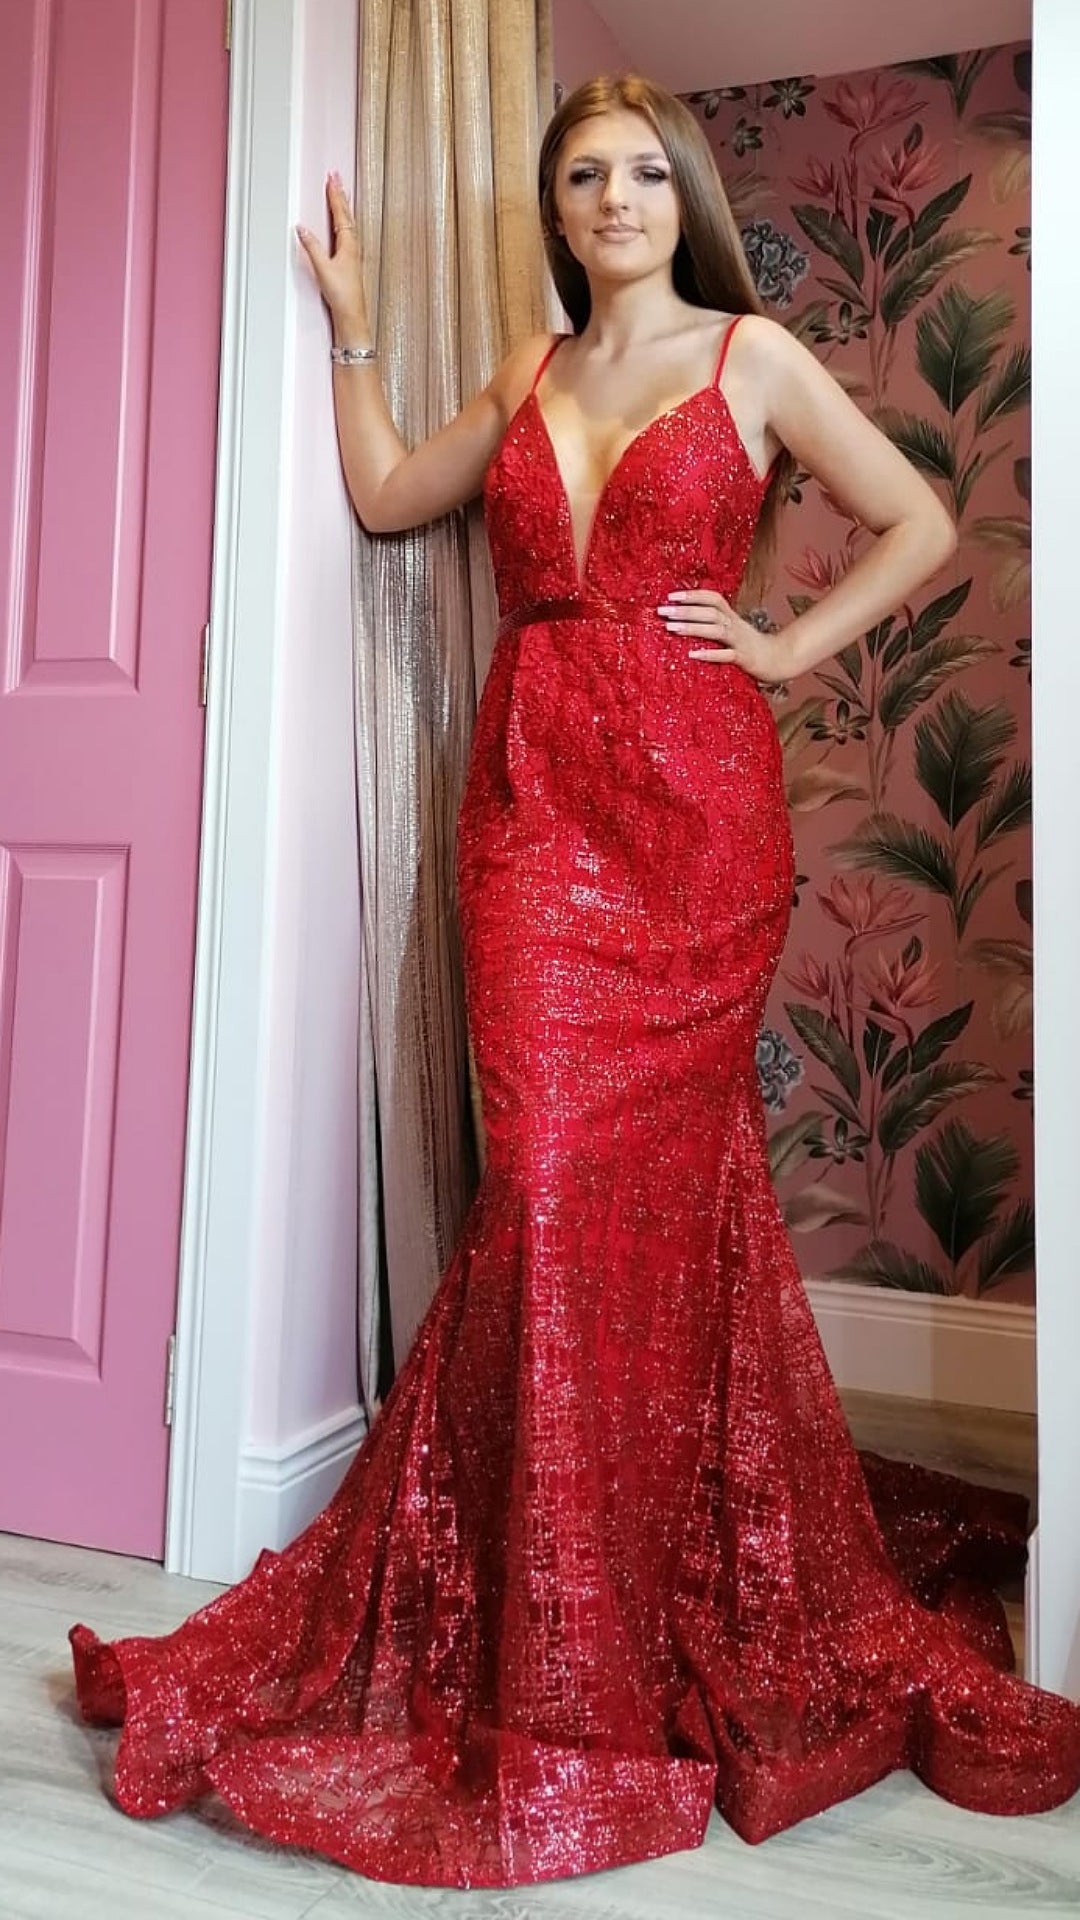 Rosie Red Skinny Strapped Backless Flowing Trail Formal Prom Dress